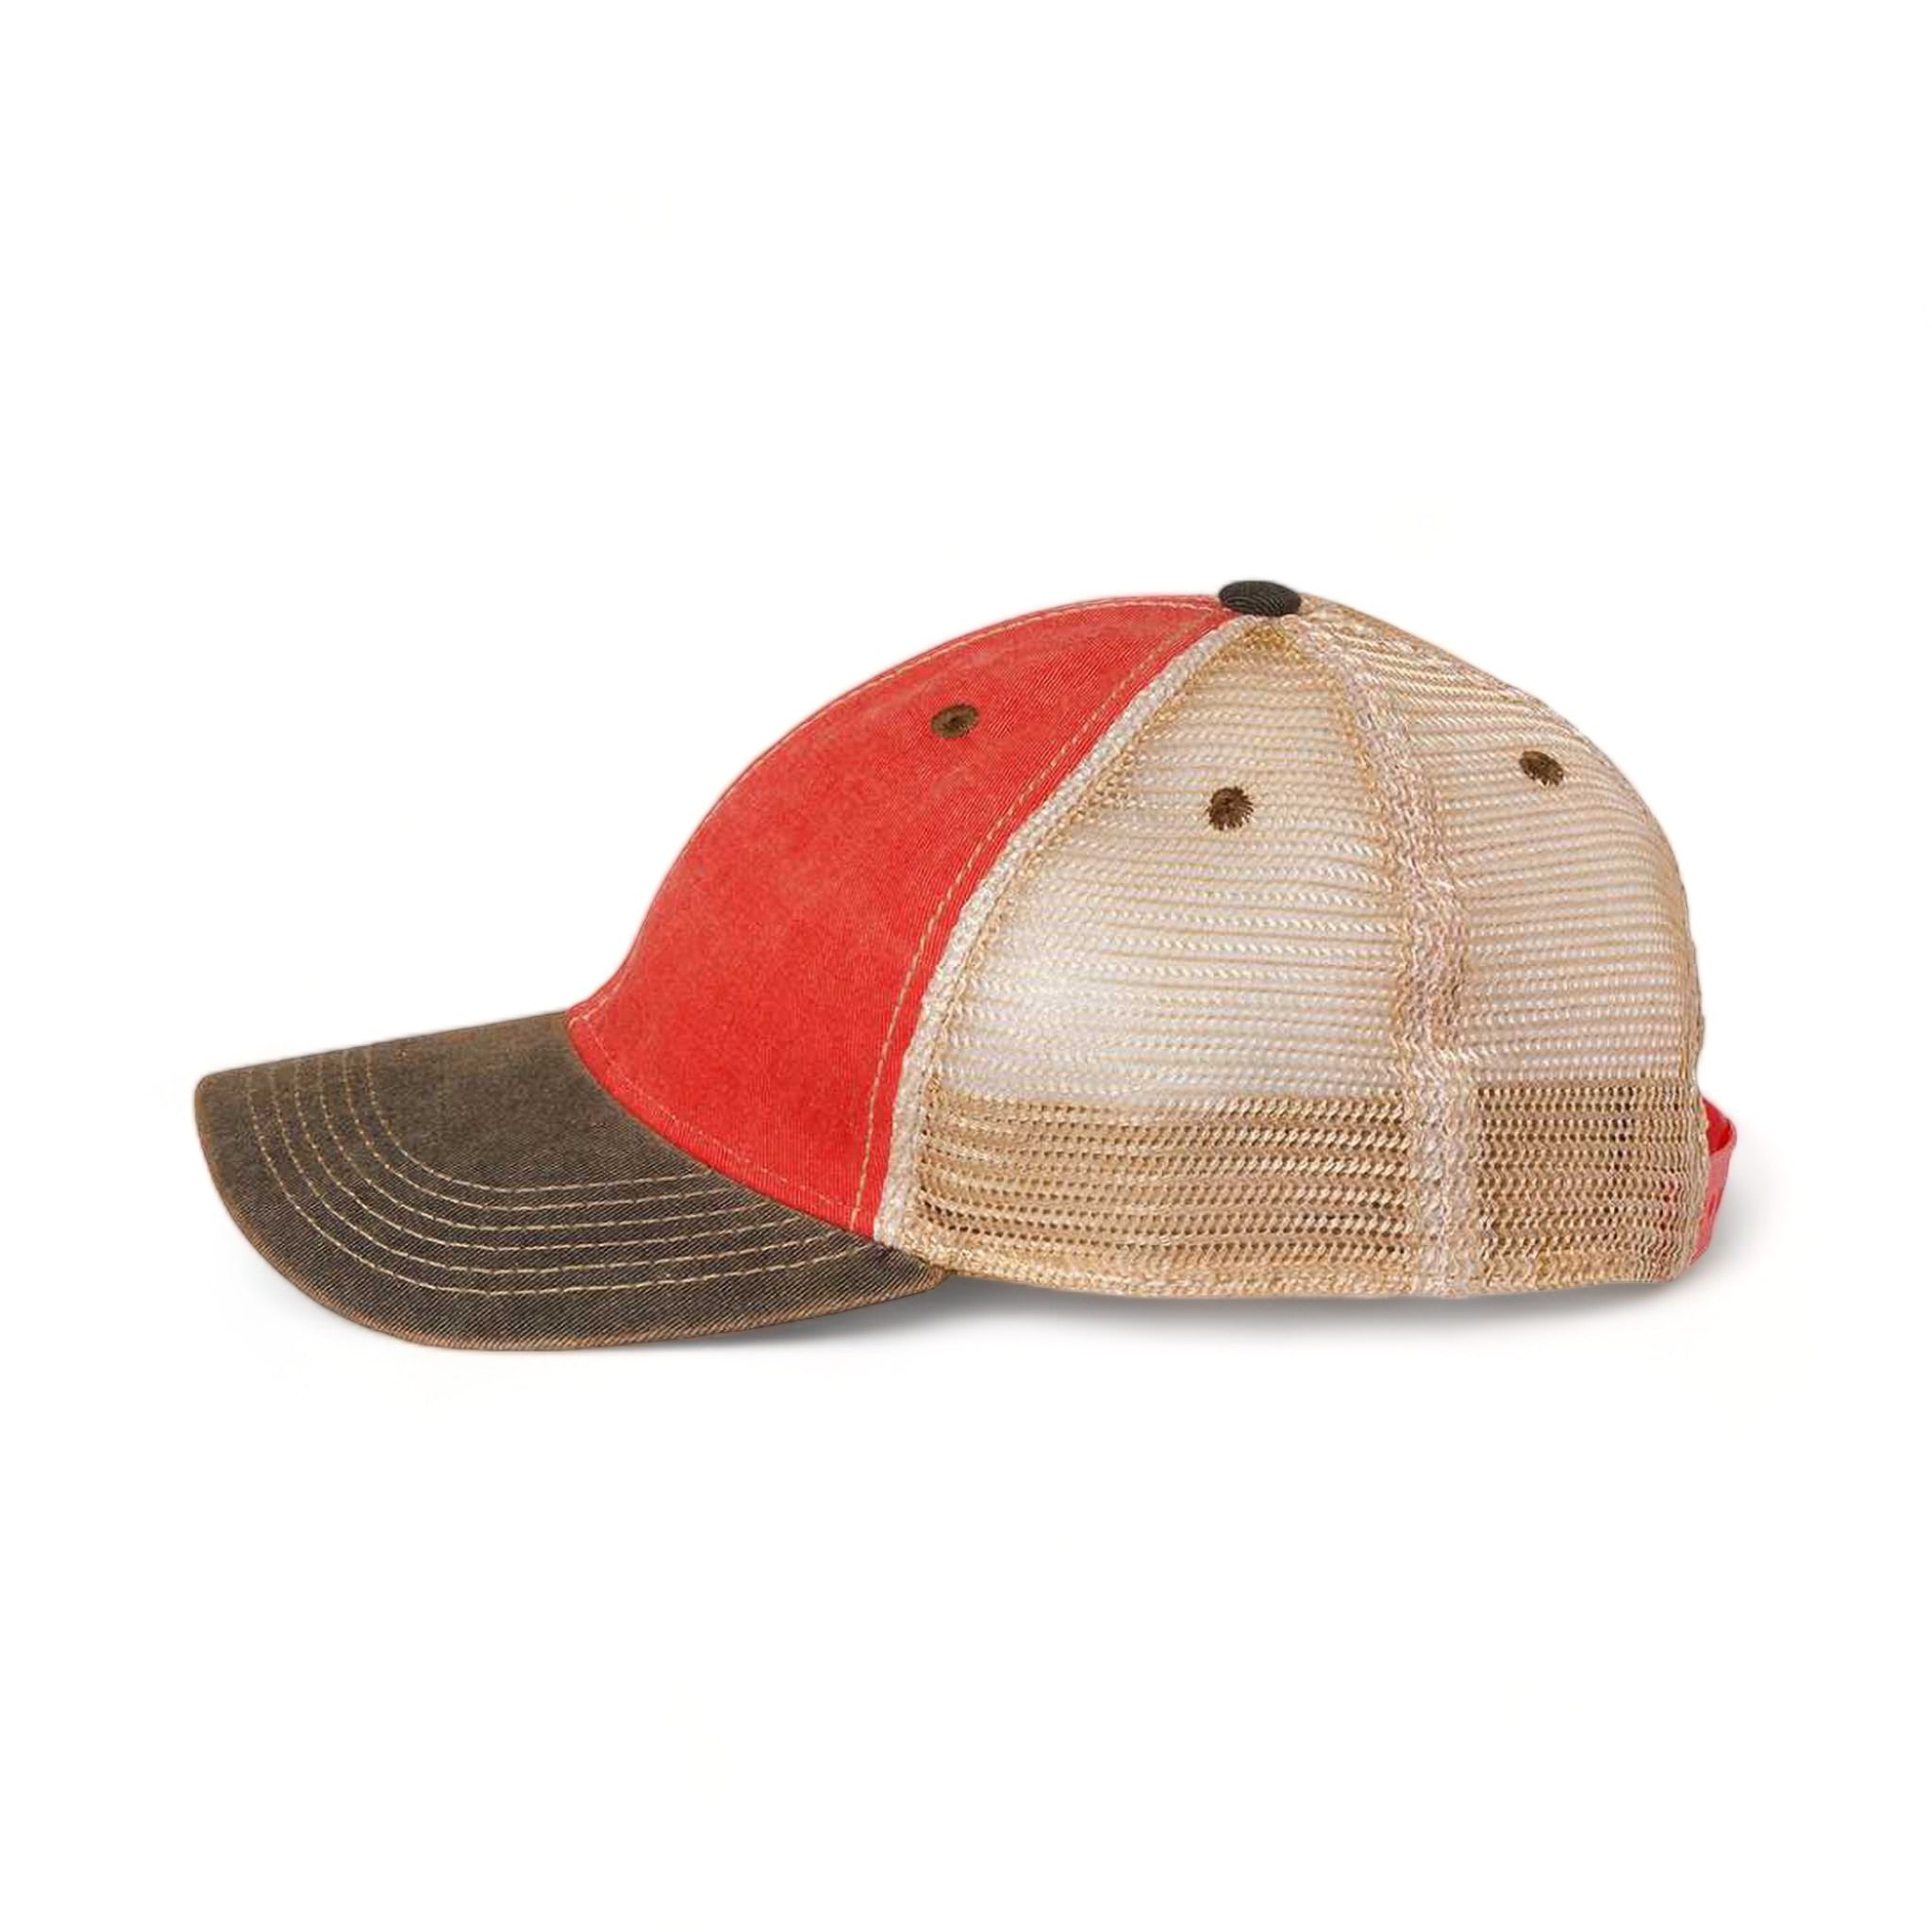 Side view of LEGACY OFA custom hat in scarlet red, black and khaki